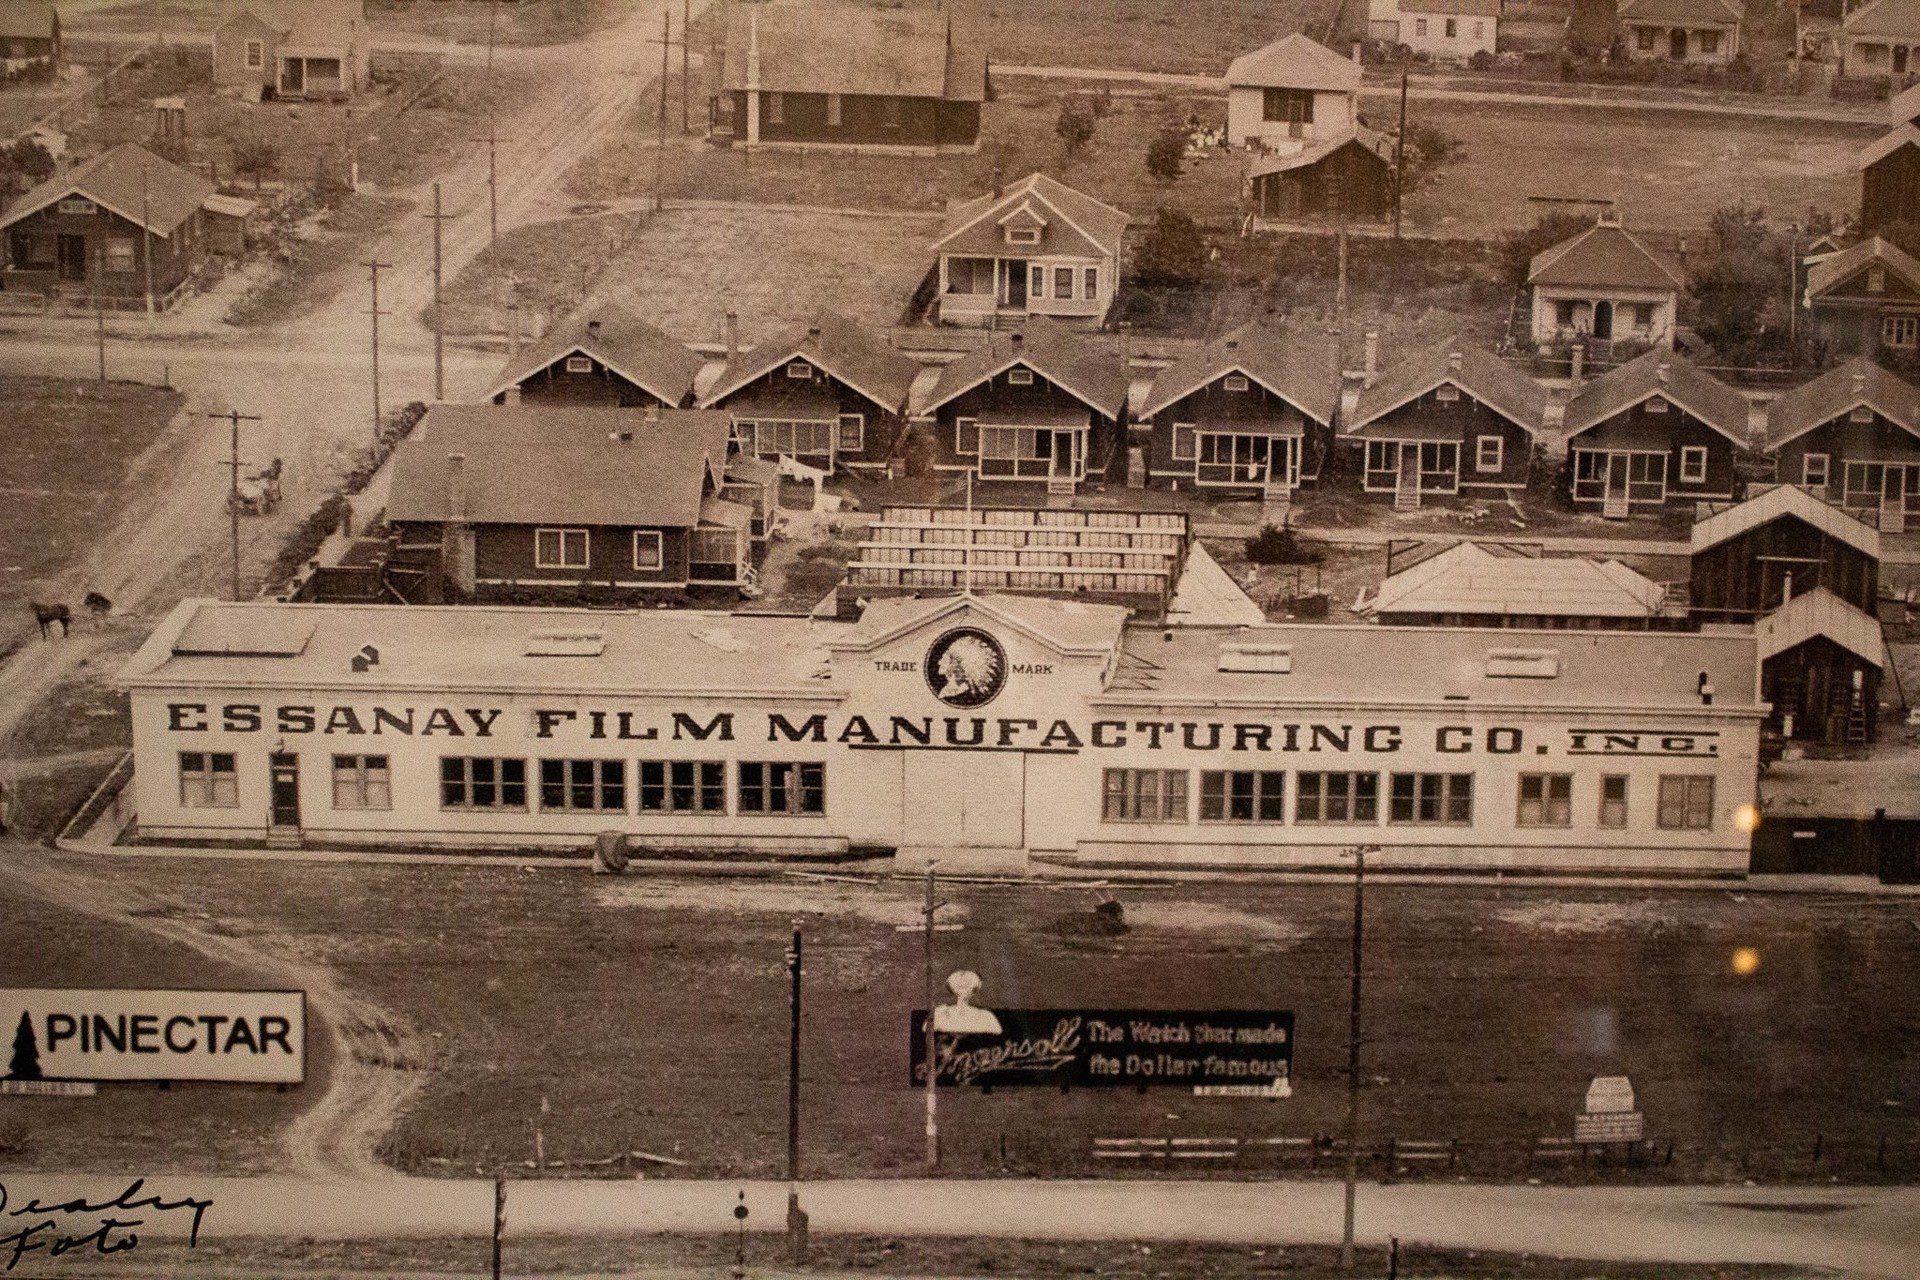 Back in the 1910s, the Essanay Film Manufacturing Co. was a big deal in Niles, California, as well as West Coast filmmaking. 